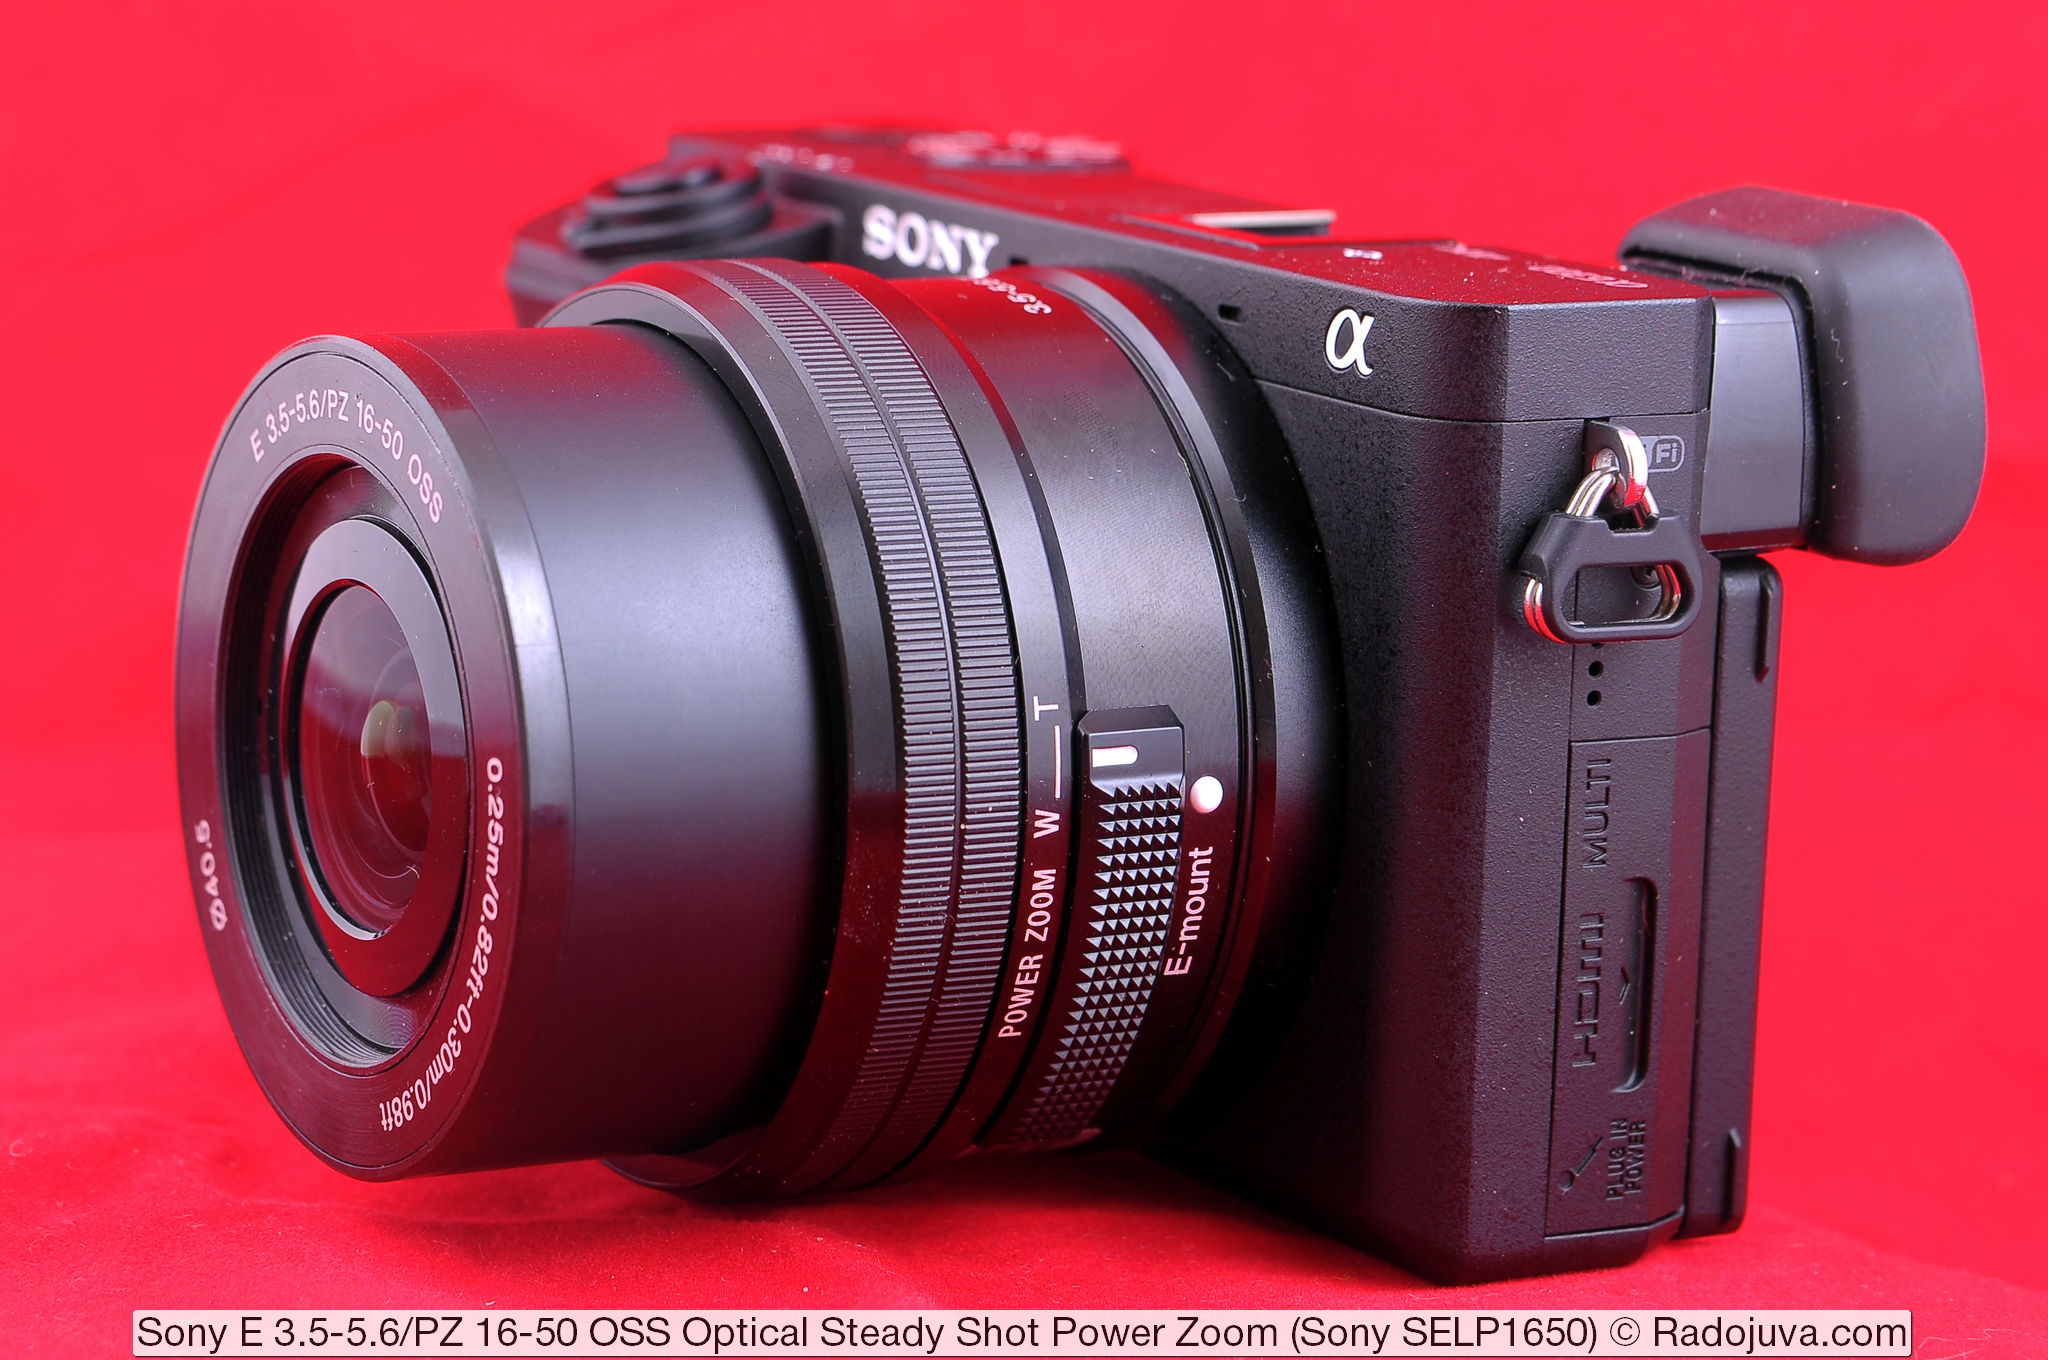 Sony E 3.5-5.6 / PZ 16-50 OSS Optical Steady Shot Power Zoom (Sony SELP1650). The lens is shown on a Sony a6300 mirrorless camera (ILCE-6300).